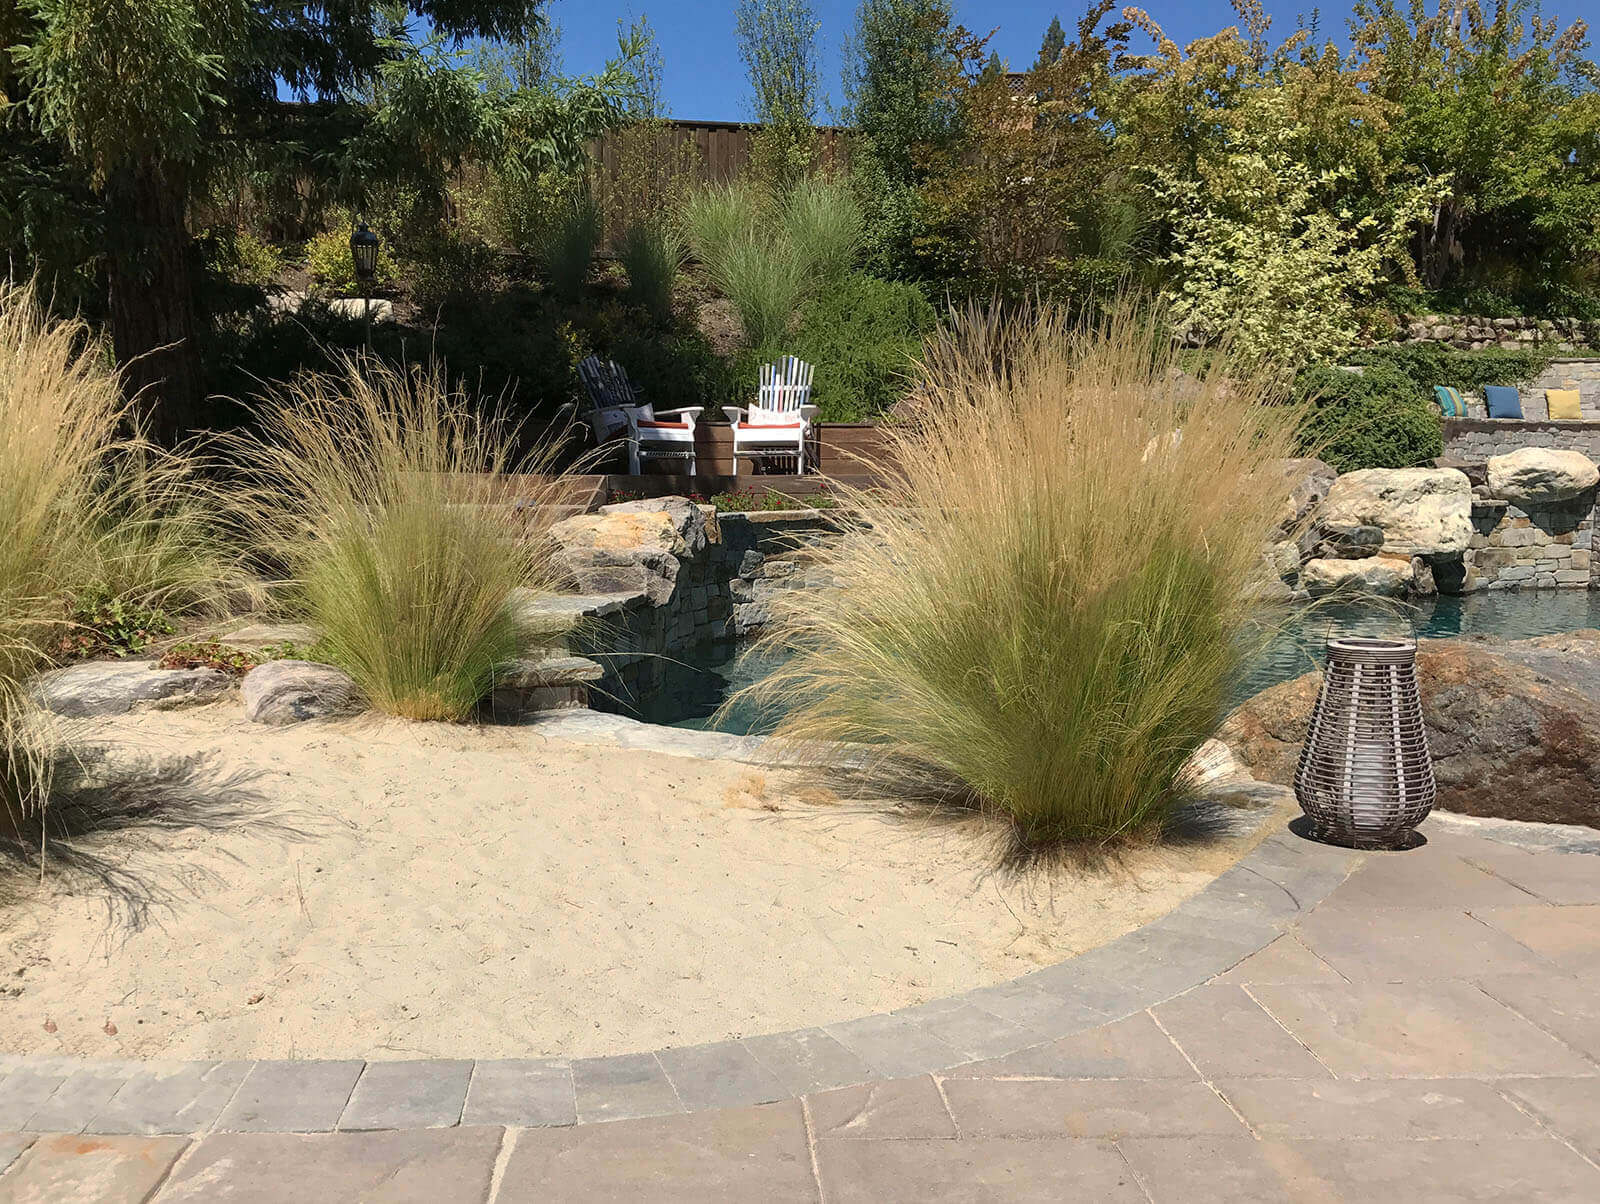 Rock-lined slate stone patio leading to ornamental grass decorated sandy beach area on edge of pool and walkway to raised wooden deck with lounge chairs